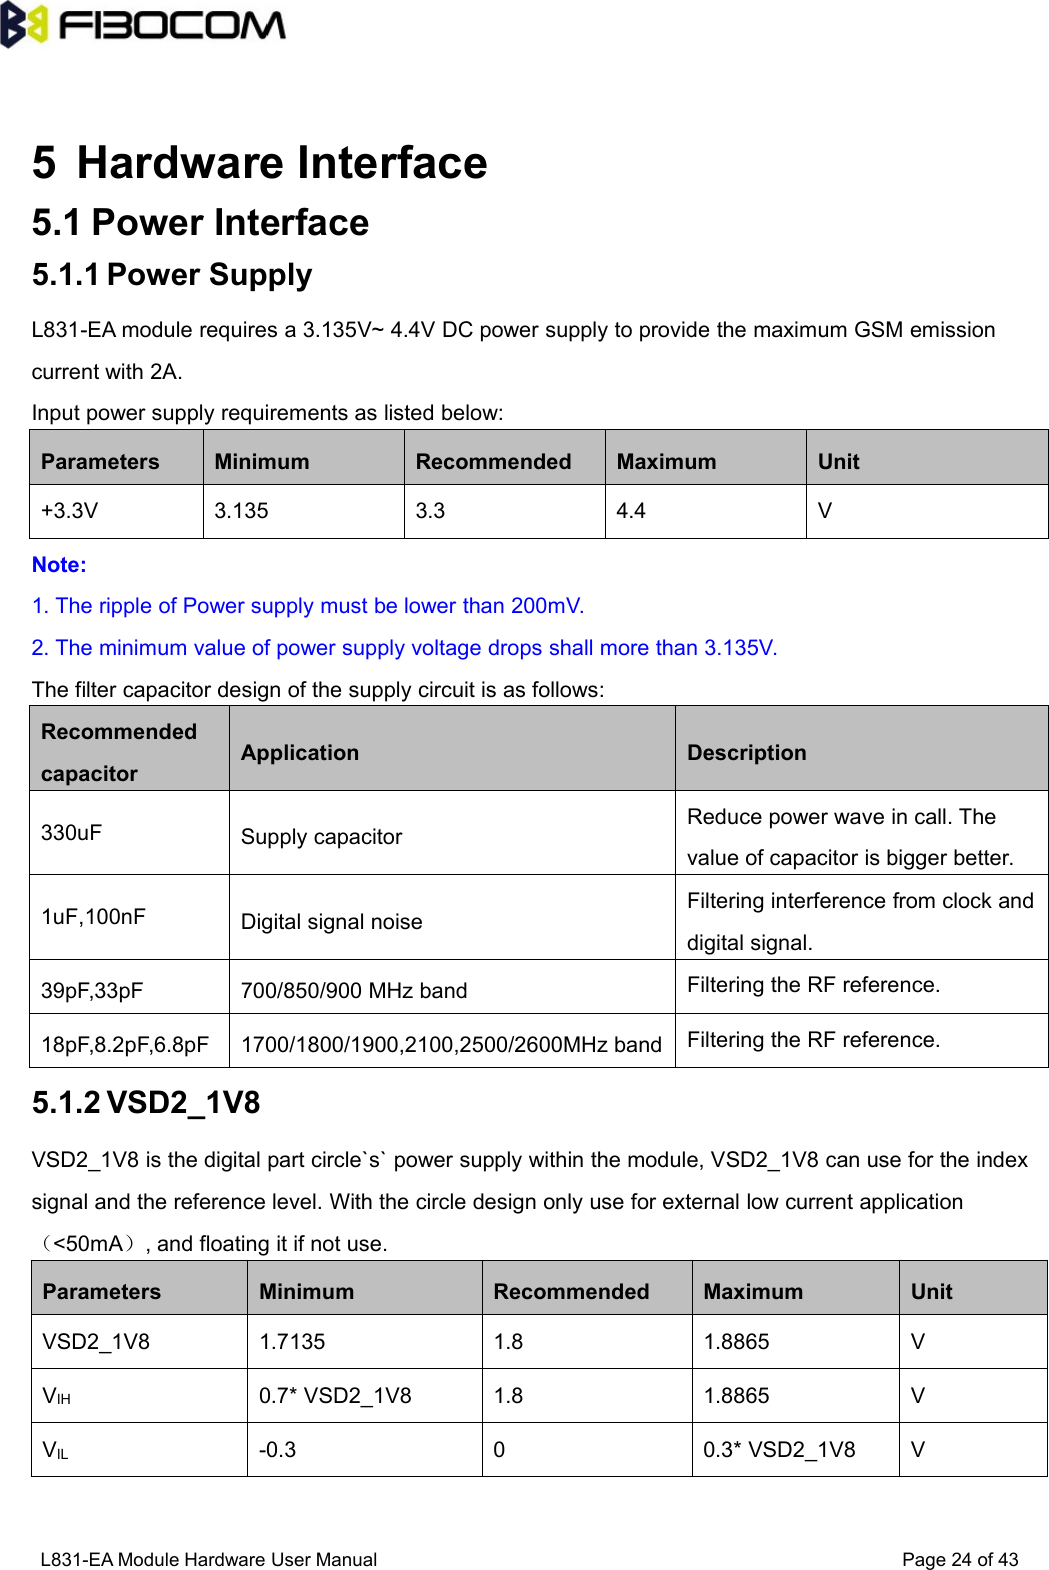 L831-EA Module Hardware User Manual Page24of435 Hardware Interface5.1 Power Interface5.1.1 Power SupplyL831-EA module requires a 3.135V~ 4.4V DC power supply to provide the maximum GSM emissioncurrent with 2A.Input power supply requirements as listed below:ParametersMinimumRecommendedMaximumUnit+3.3V3.1353.34.4VNote:1. The ripple of Power supply must be lower than 200mV.2. The minimum value of power supply voltage drops shall more than 3.135V.The filter capacitor design of the supply circuit is as follows:RecommendedcapacitorApplicationDescription330uFSupply capacitorReduce power wave in call. Thevalue of capacitor is bigger better.1uF,100nFDigital signal noiseFiltering interference from clock anddigital signal.39pF,33pF700/850/900 MHz bandFiltering the RF reference.18pF,8.2pF,6.8pF1700/1800/1900,2100,2500/2600MHz bandFiltering the RF reference.5.1.2 VSD2_1V8VSD2_1V8 is the digital part circle`s` power supply within the module, VSD2_1V8 can use for the indexsignal and the reference level. With the circle design only use for external low current application（&lt;50mA）, and floating it if not use.ParametersMinimumRecommendedMaximumUnitVSD2_1V81.71351.81.8865VVIH0.7* VSD2_1V81.81.8865VVIL-0.300.3* VSD2_1V8V